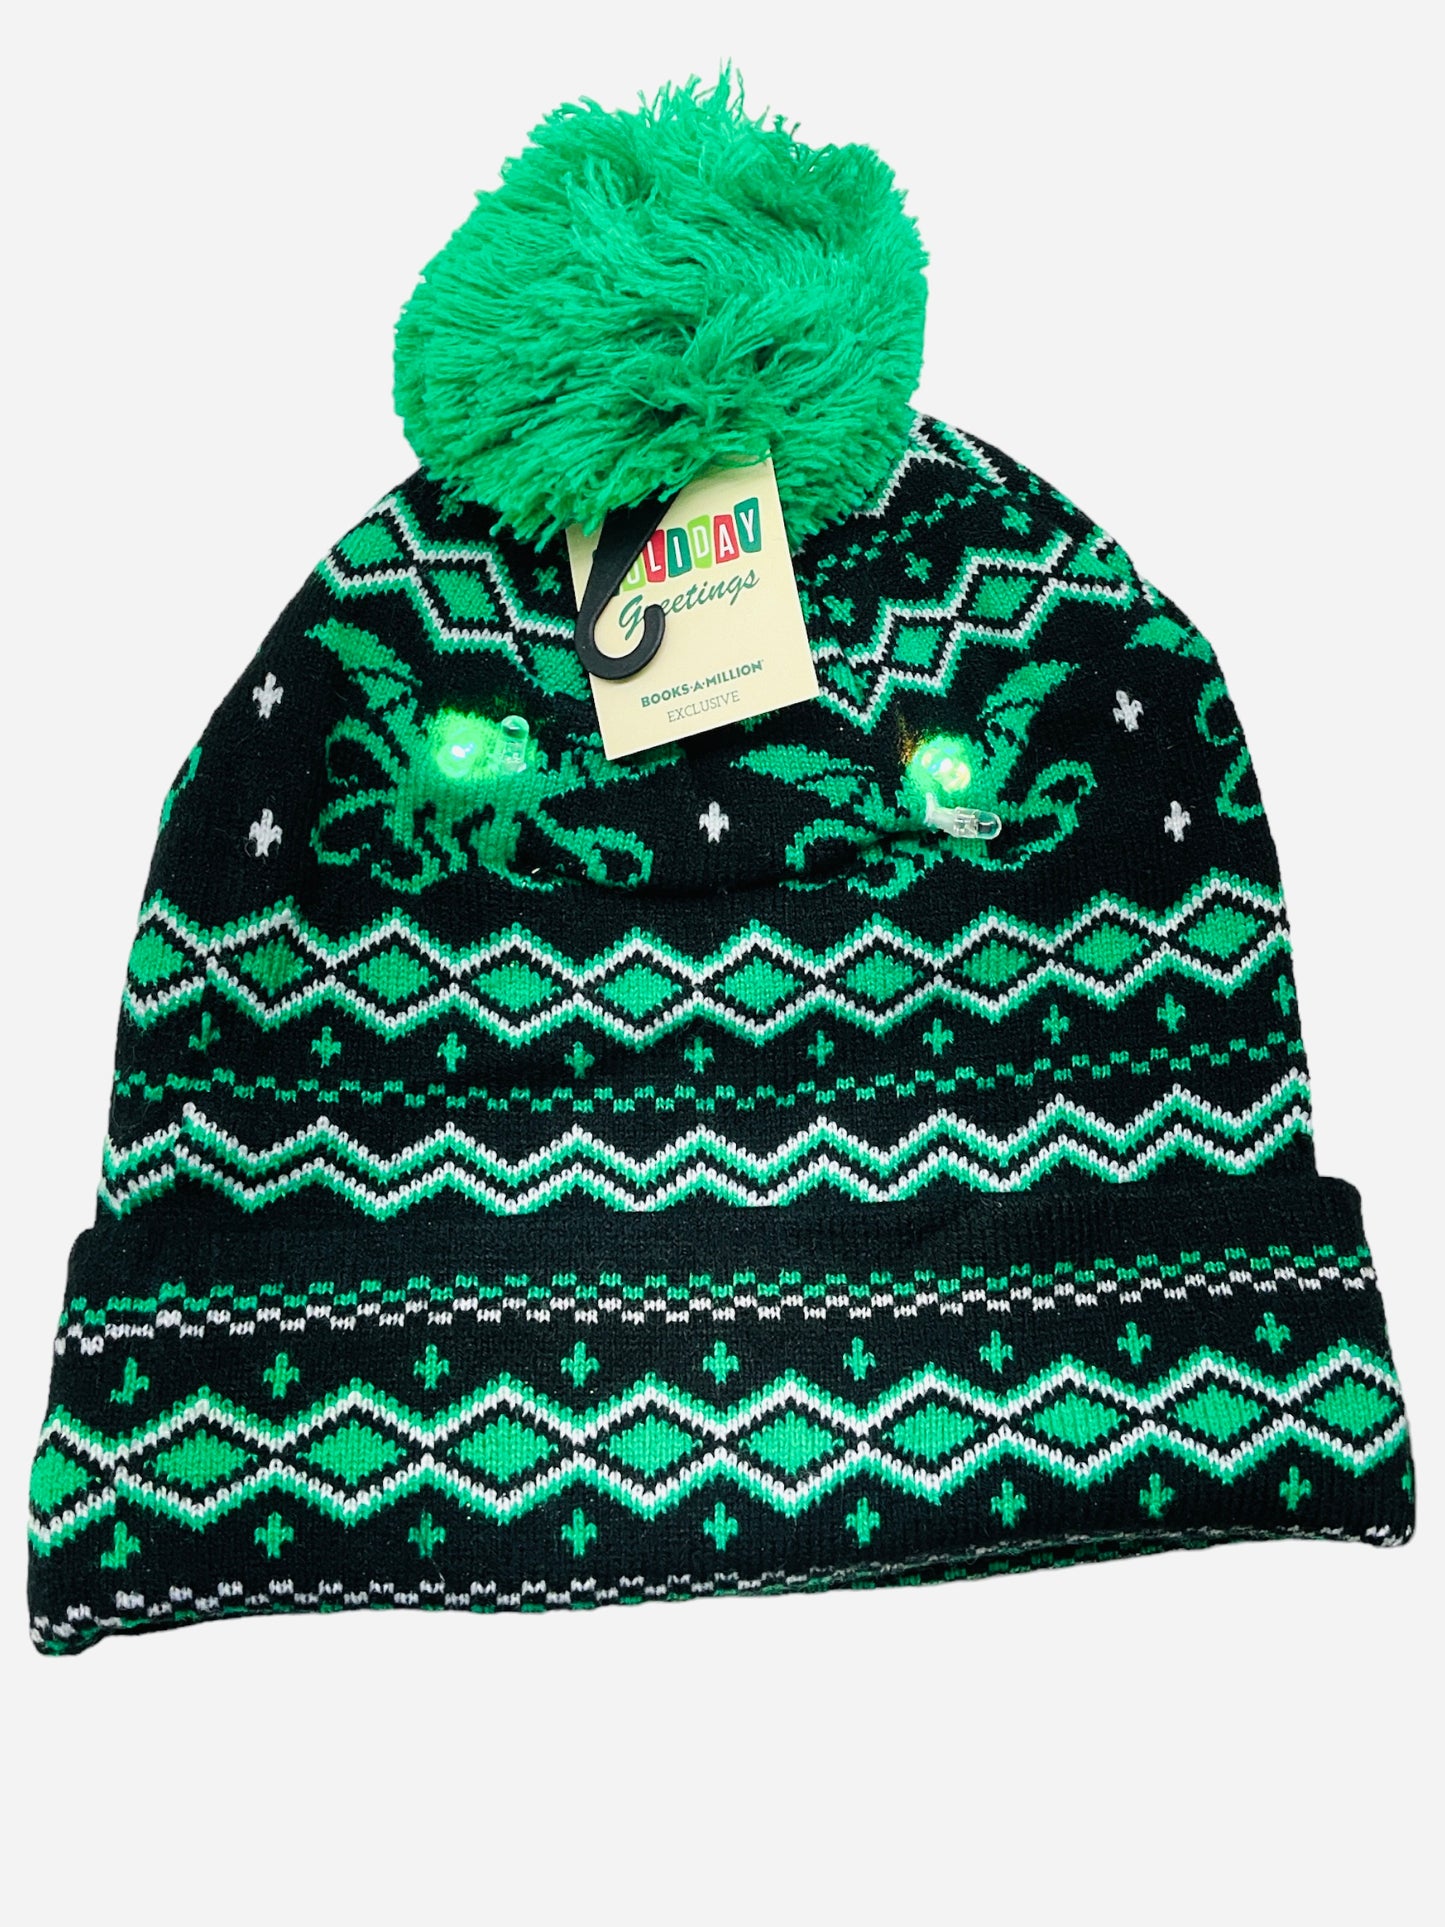 Christmas Light Up Beanie (One Size Fits Most)